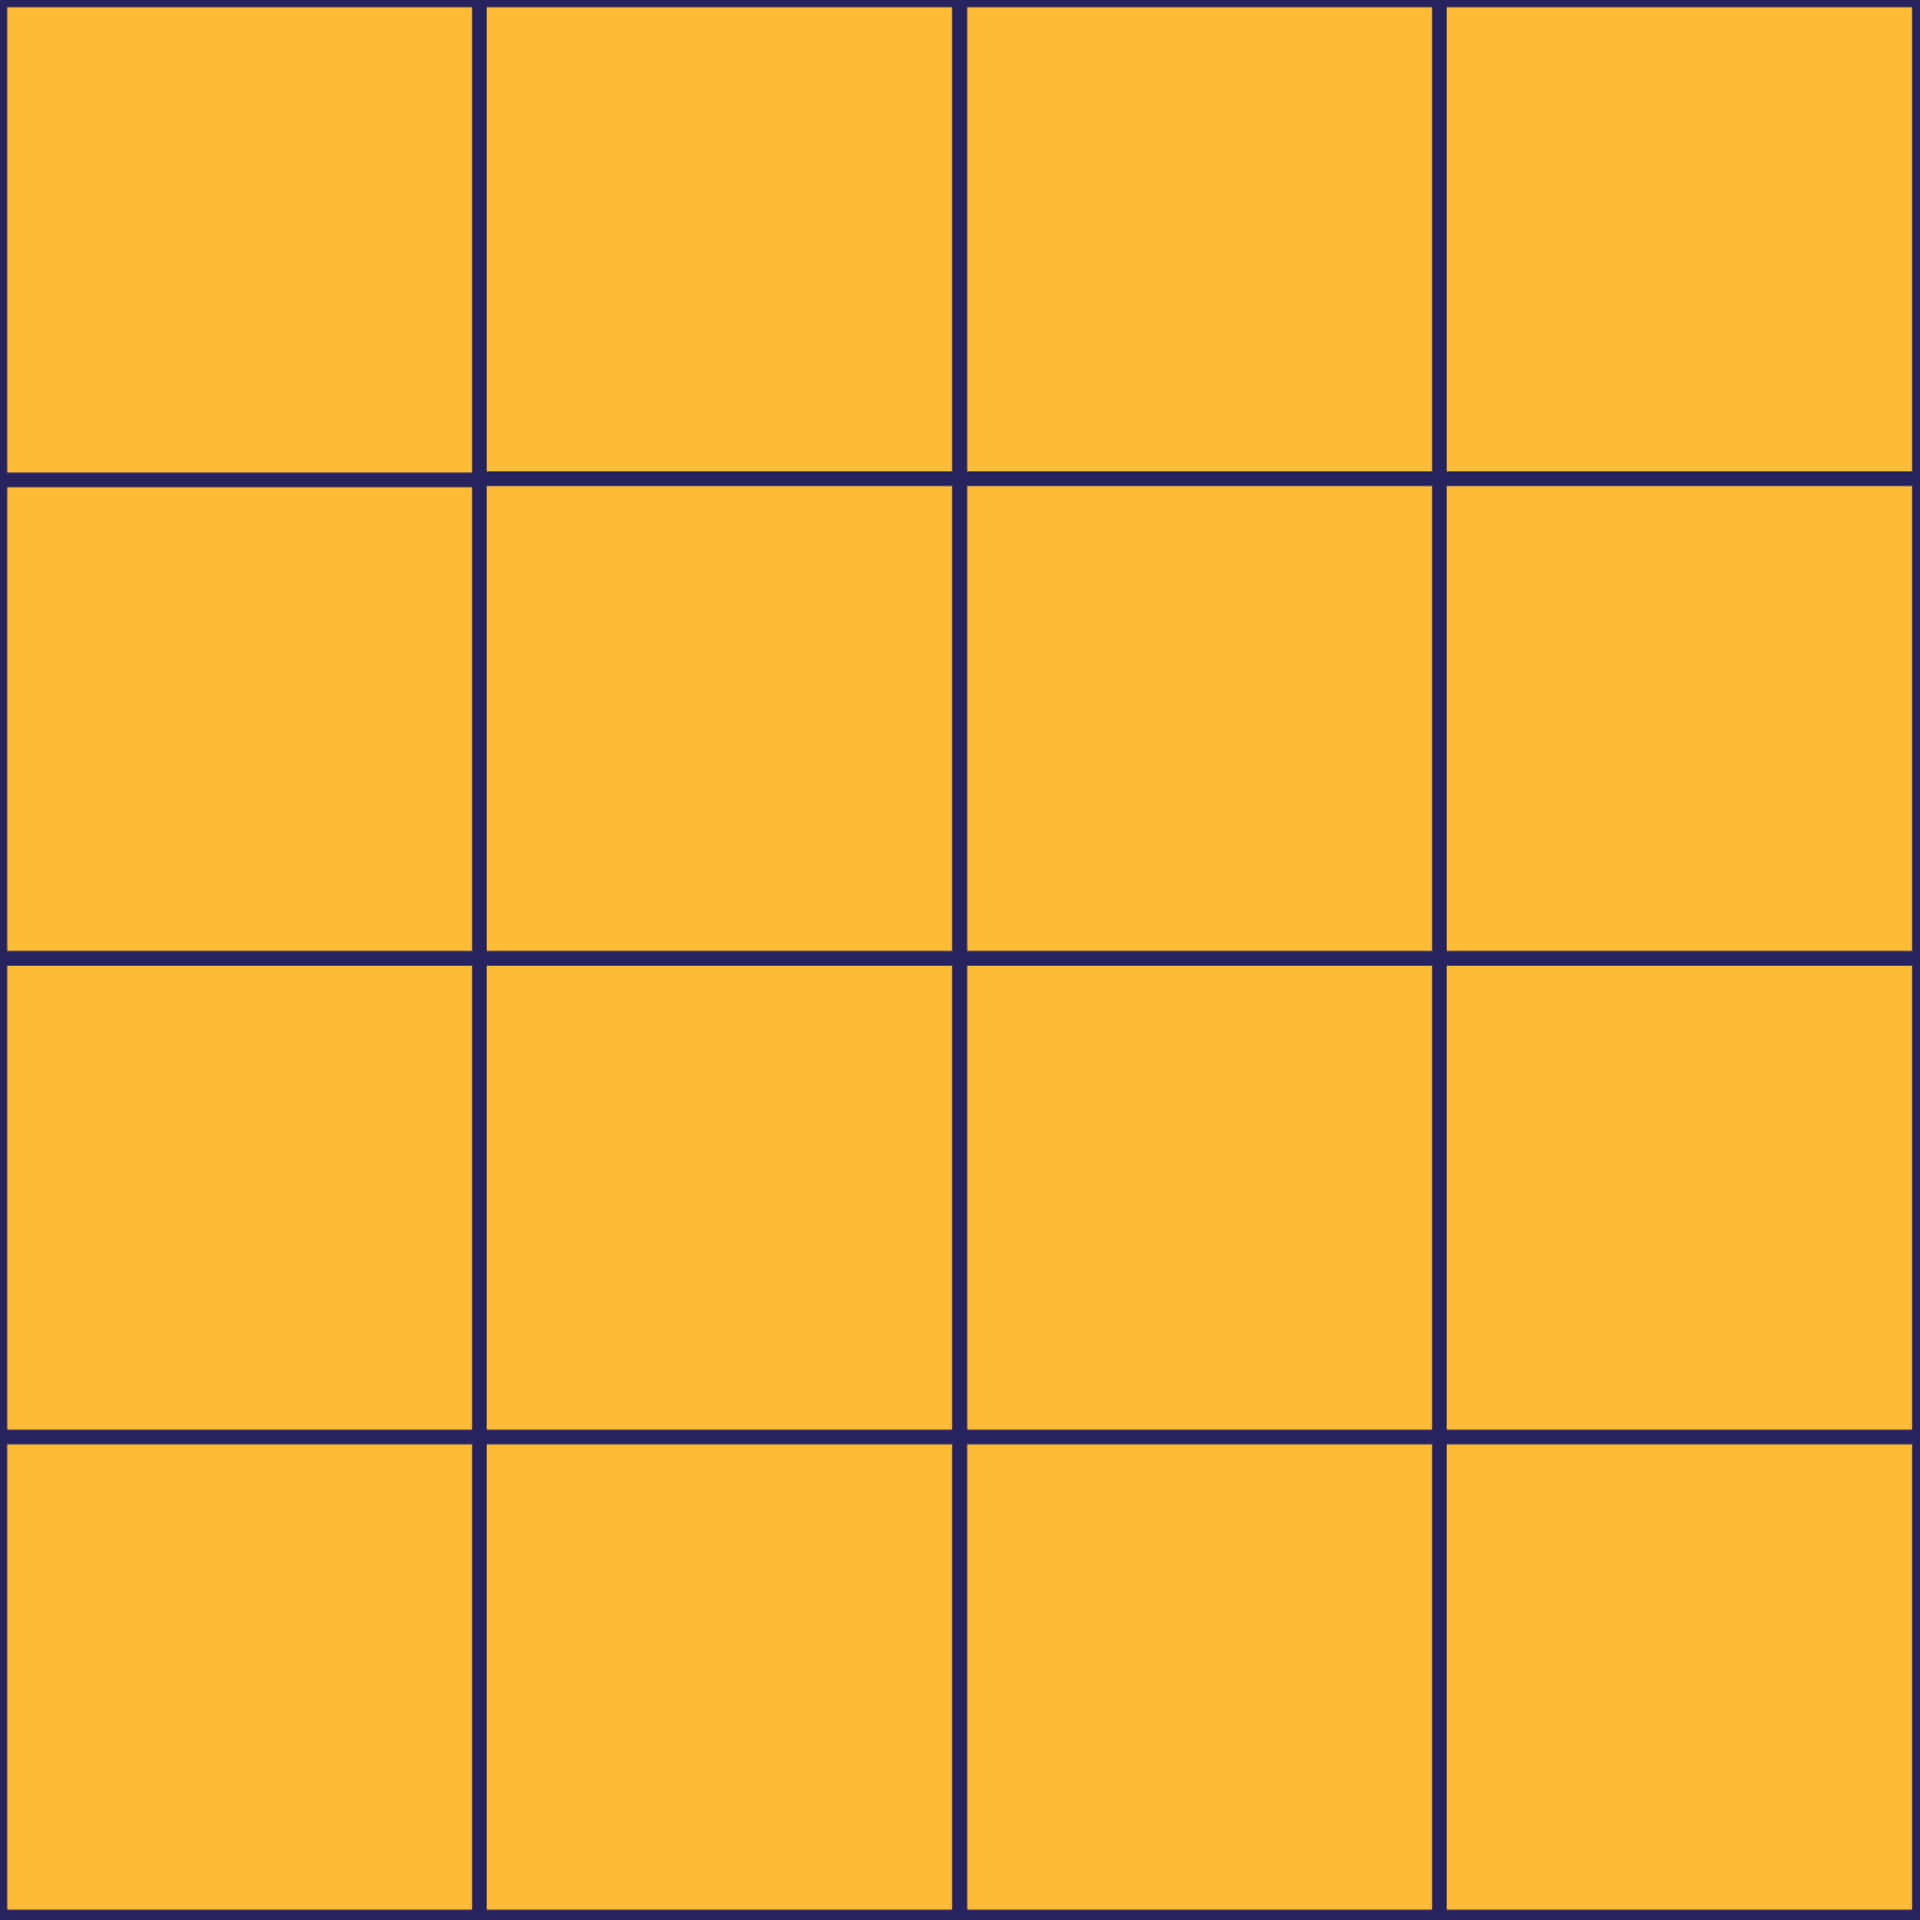 A bright and sunny yellow background